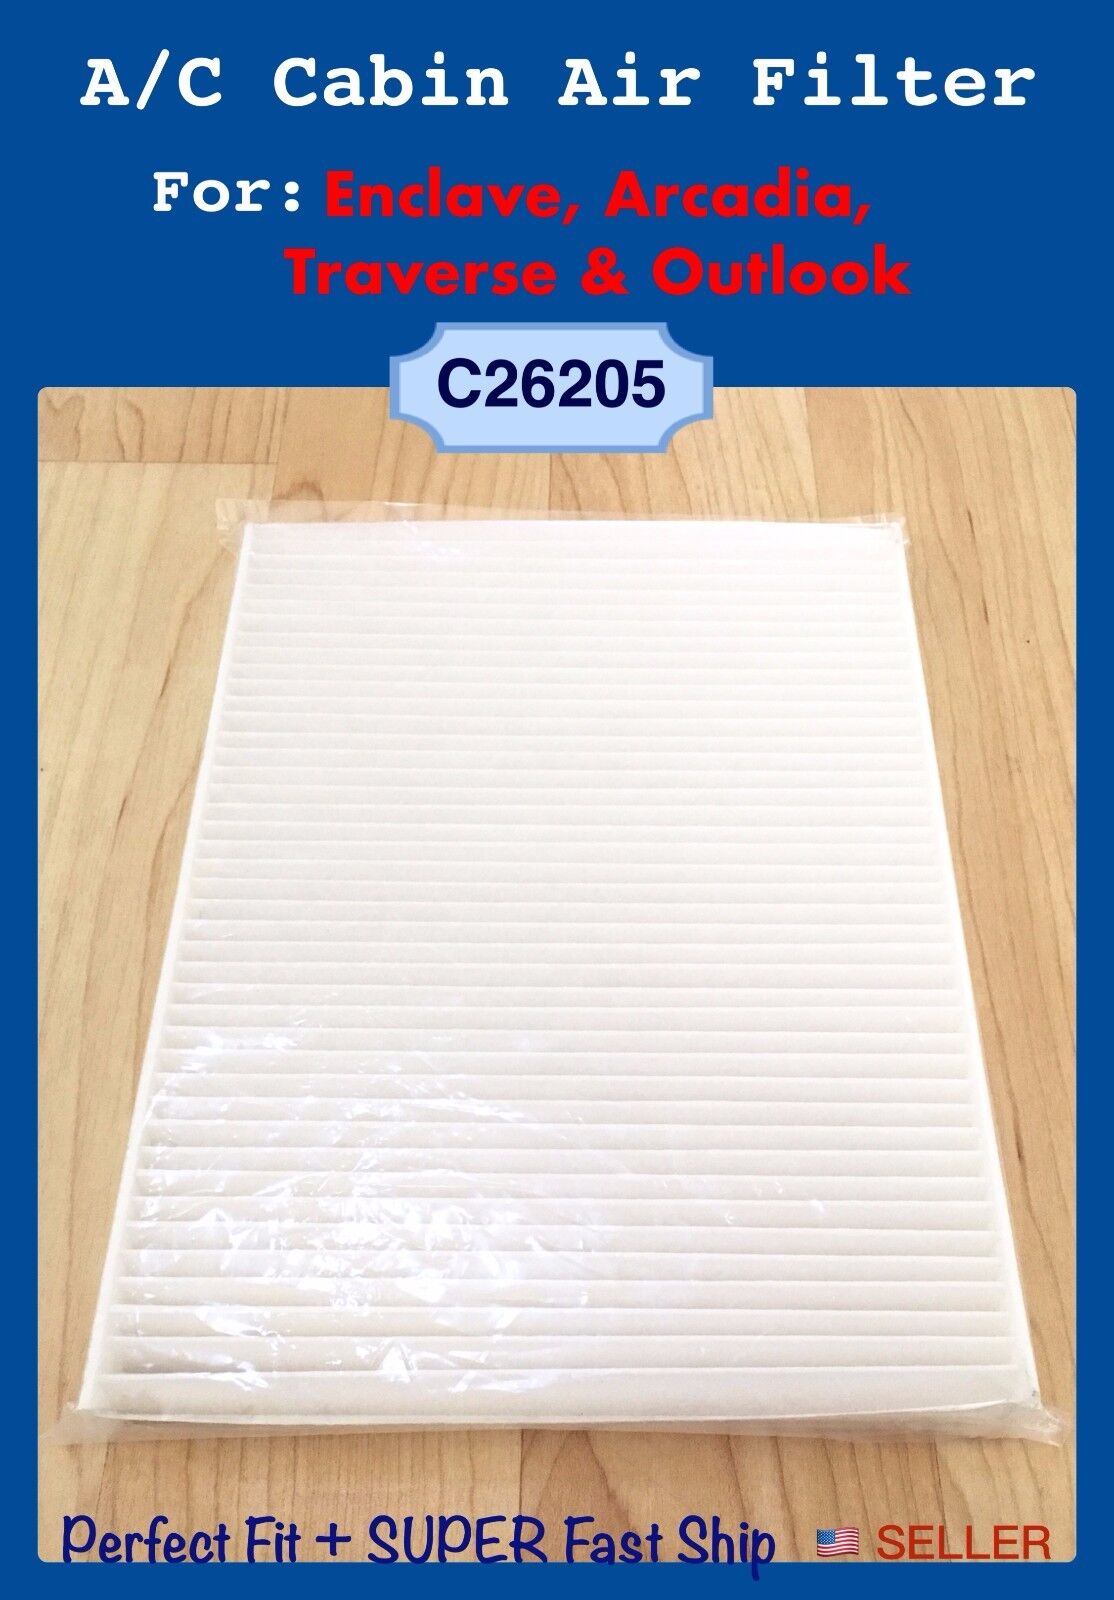 A/C Cabin Air Filter For 08-17 Enclave Traverse Acadia Outlook 26205 US Seller